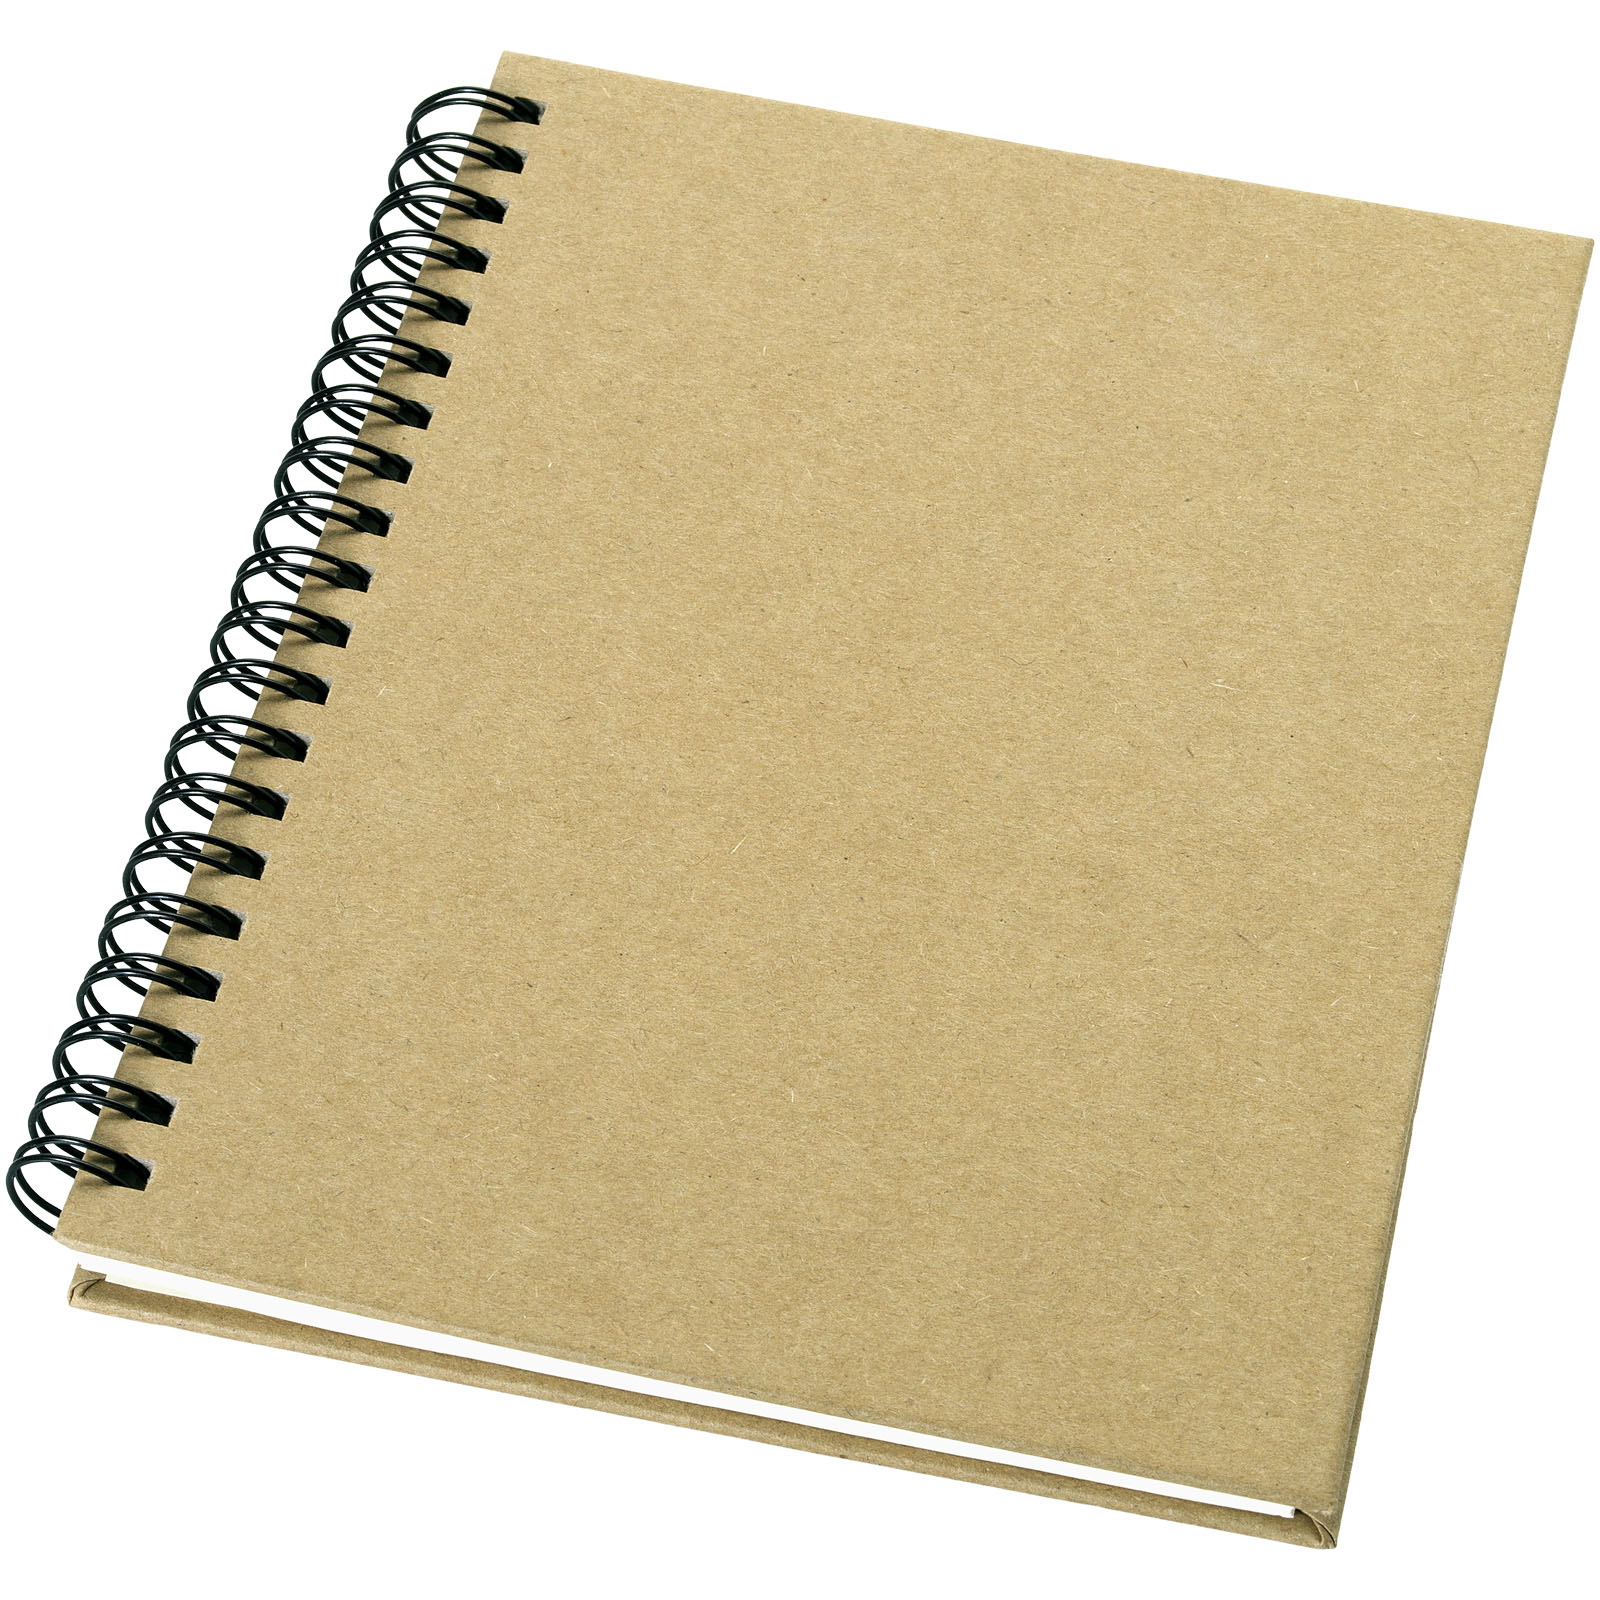 Advertising Hard cover notebooks - Mendel recycled notebook - 0